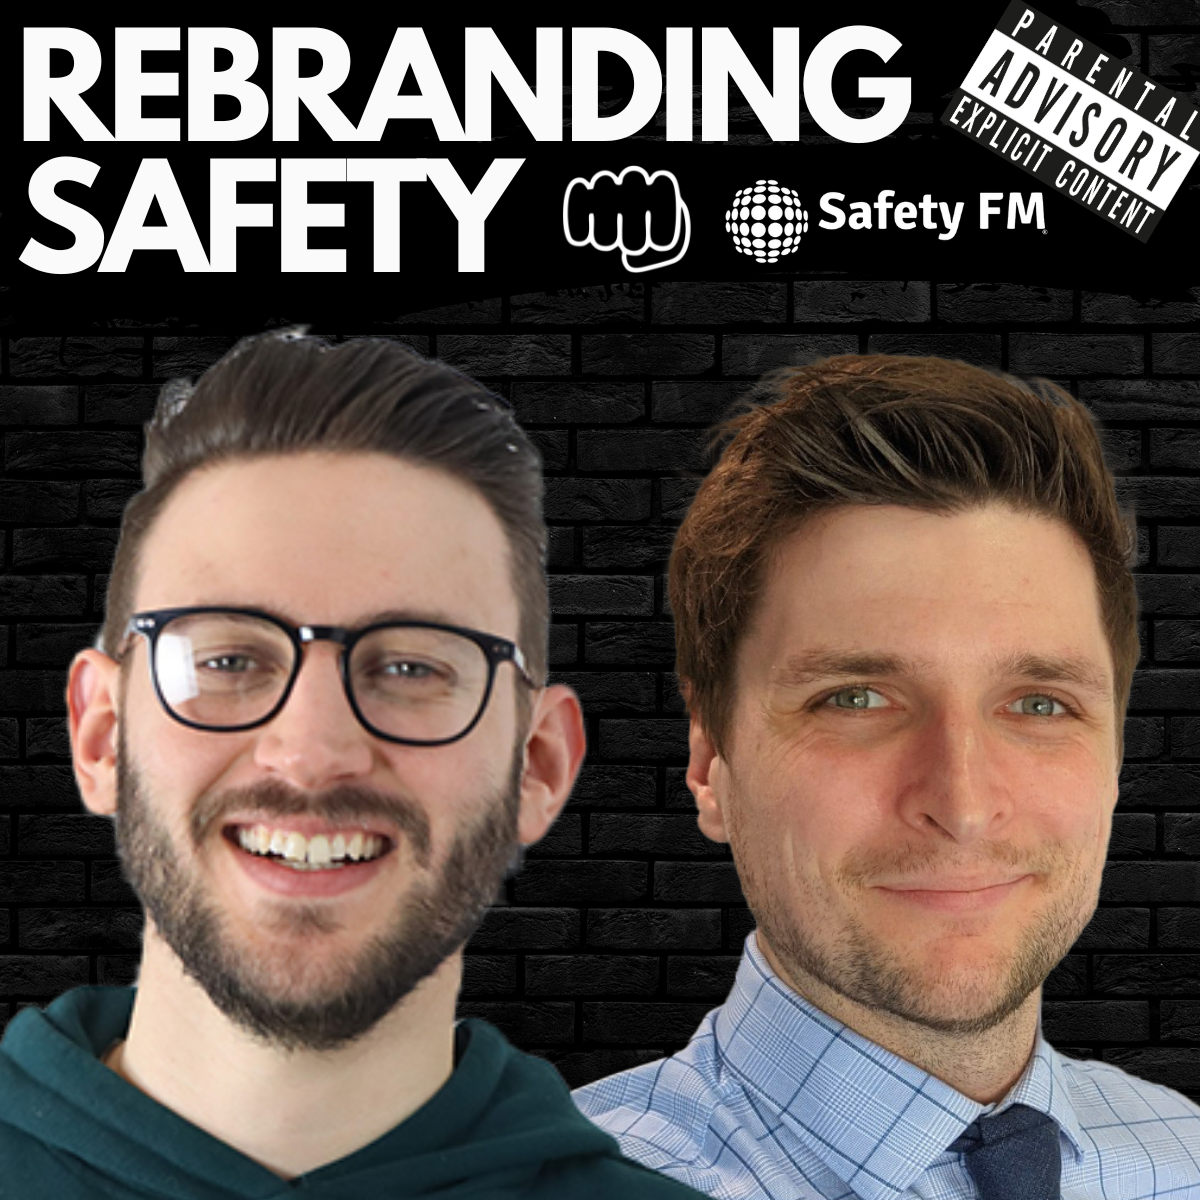 Safety professionals - are you ok? The Rebranding Safety Show